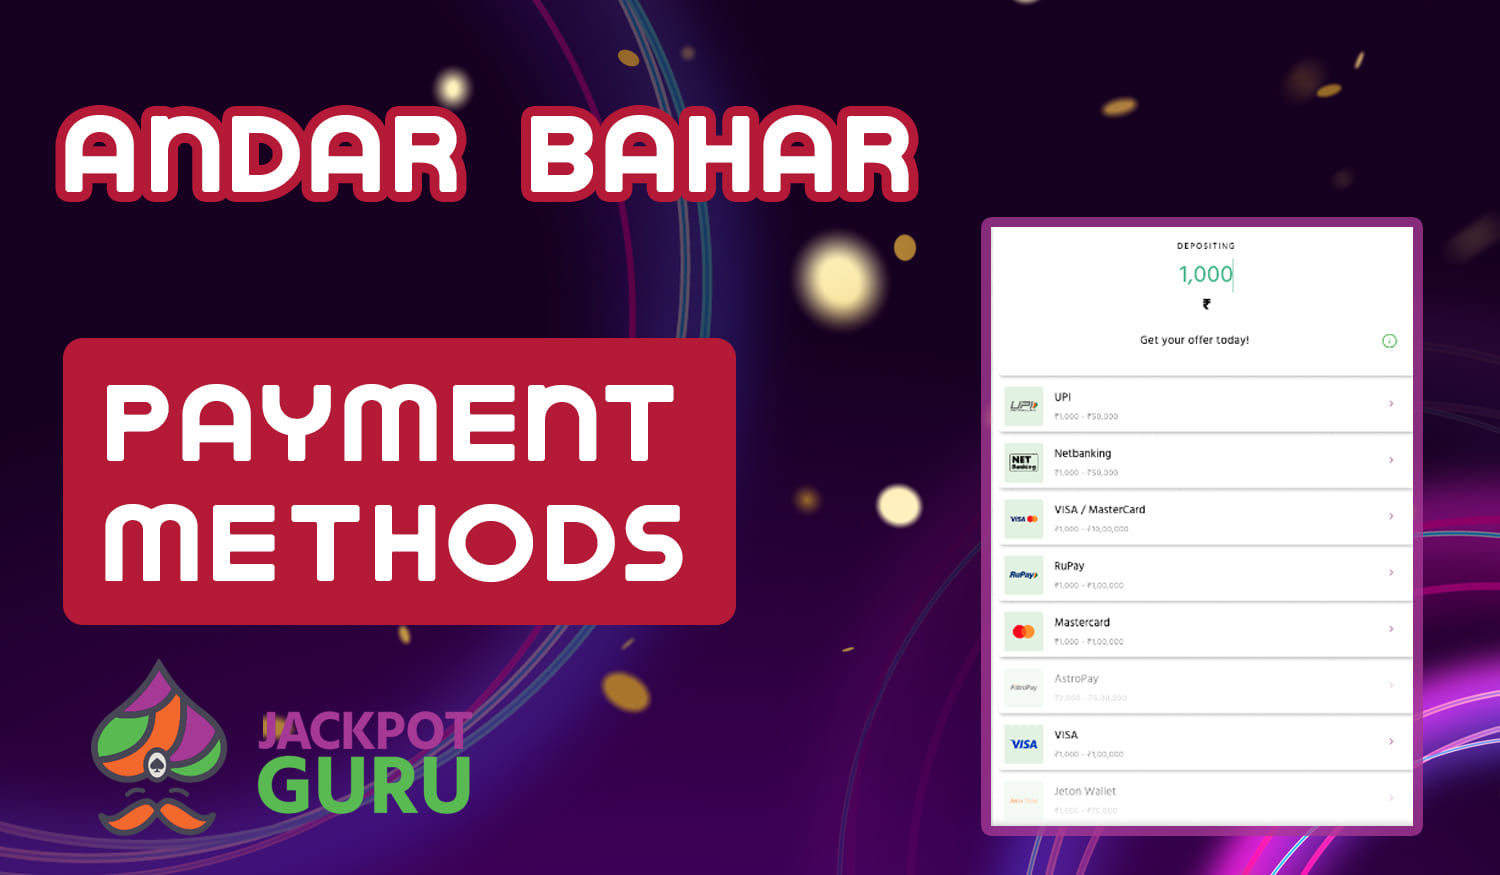 Payment methods for deposits and withdrawals from Jackpot Guru site